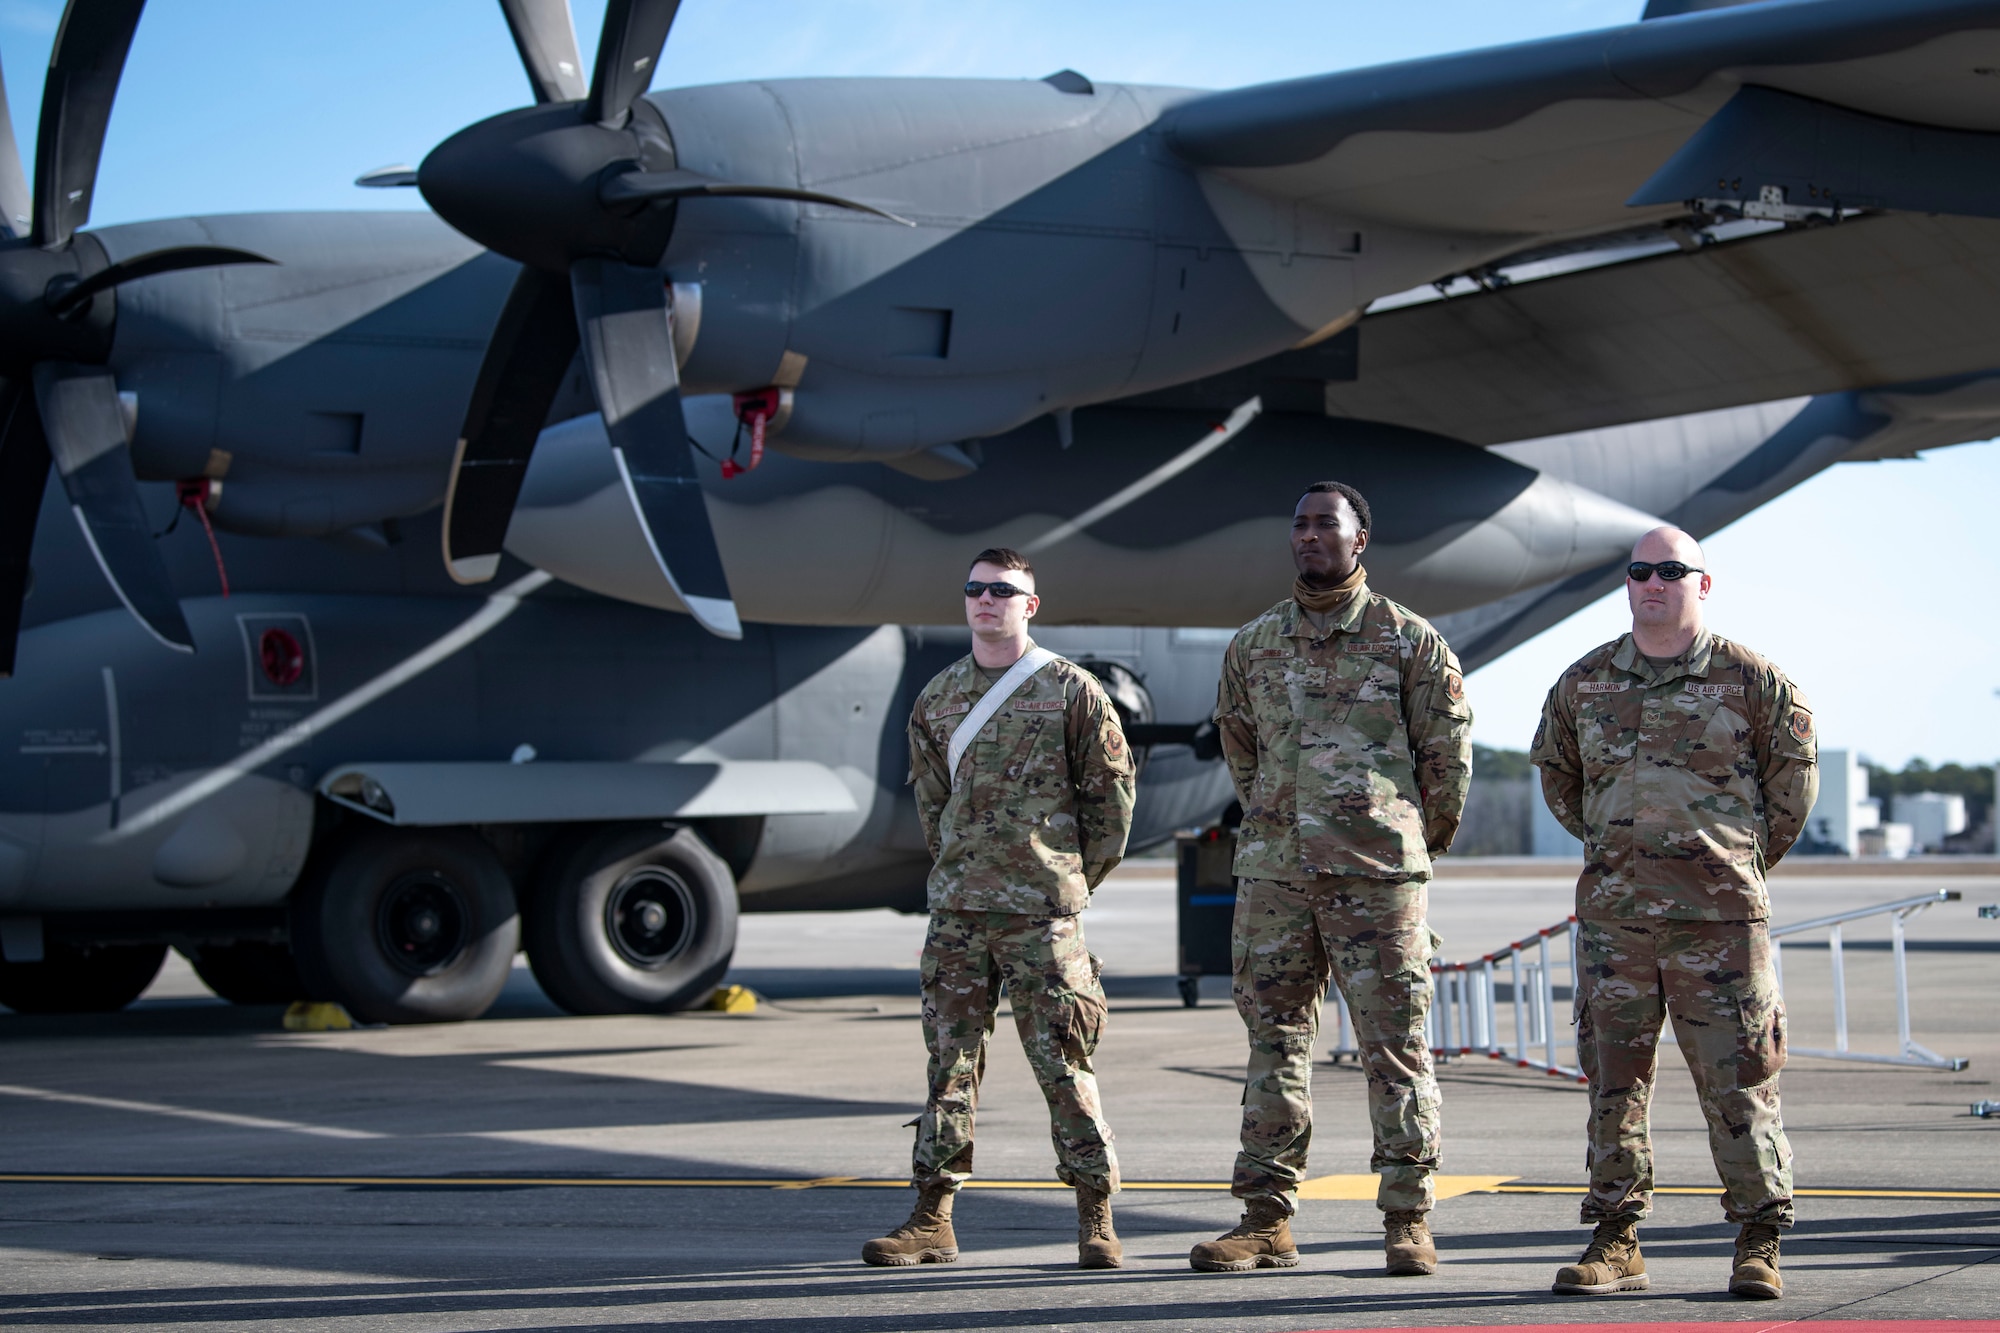 U.S. Air Force Airman 1st Class Ryian Mayfield, left, U.S. Air Force Senior Airman Jordan Jones, center, 4th Aircraft Maintenance Unit load crew members, and U.S. Air Force Staff Sgt. Matthew Harmon, right, a 4th AMU weapons load crew chief, are introduced during the 2022 Weapons Load Crew of the Year Competition, Jan. 31, 2022, at Hurlburt Field, Florida.